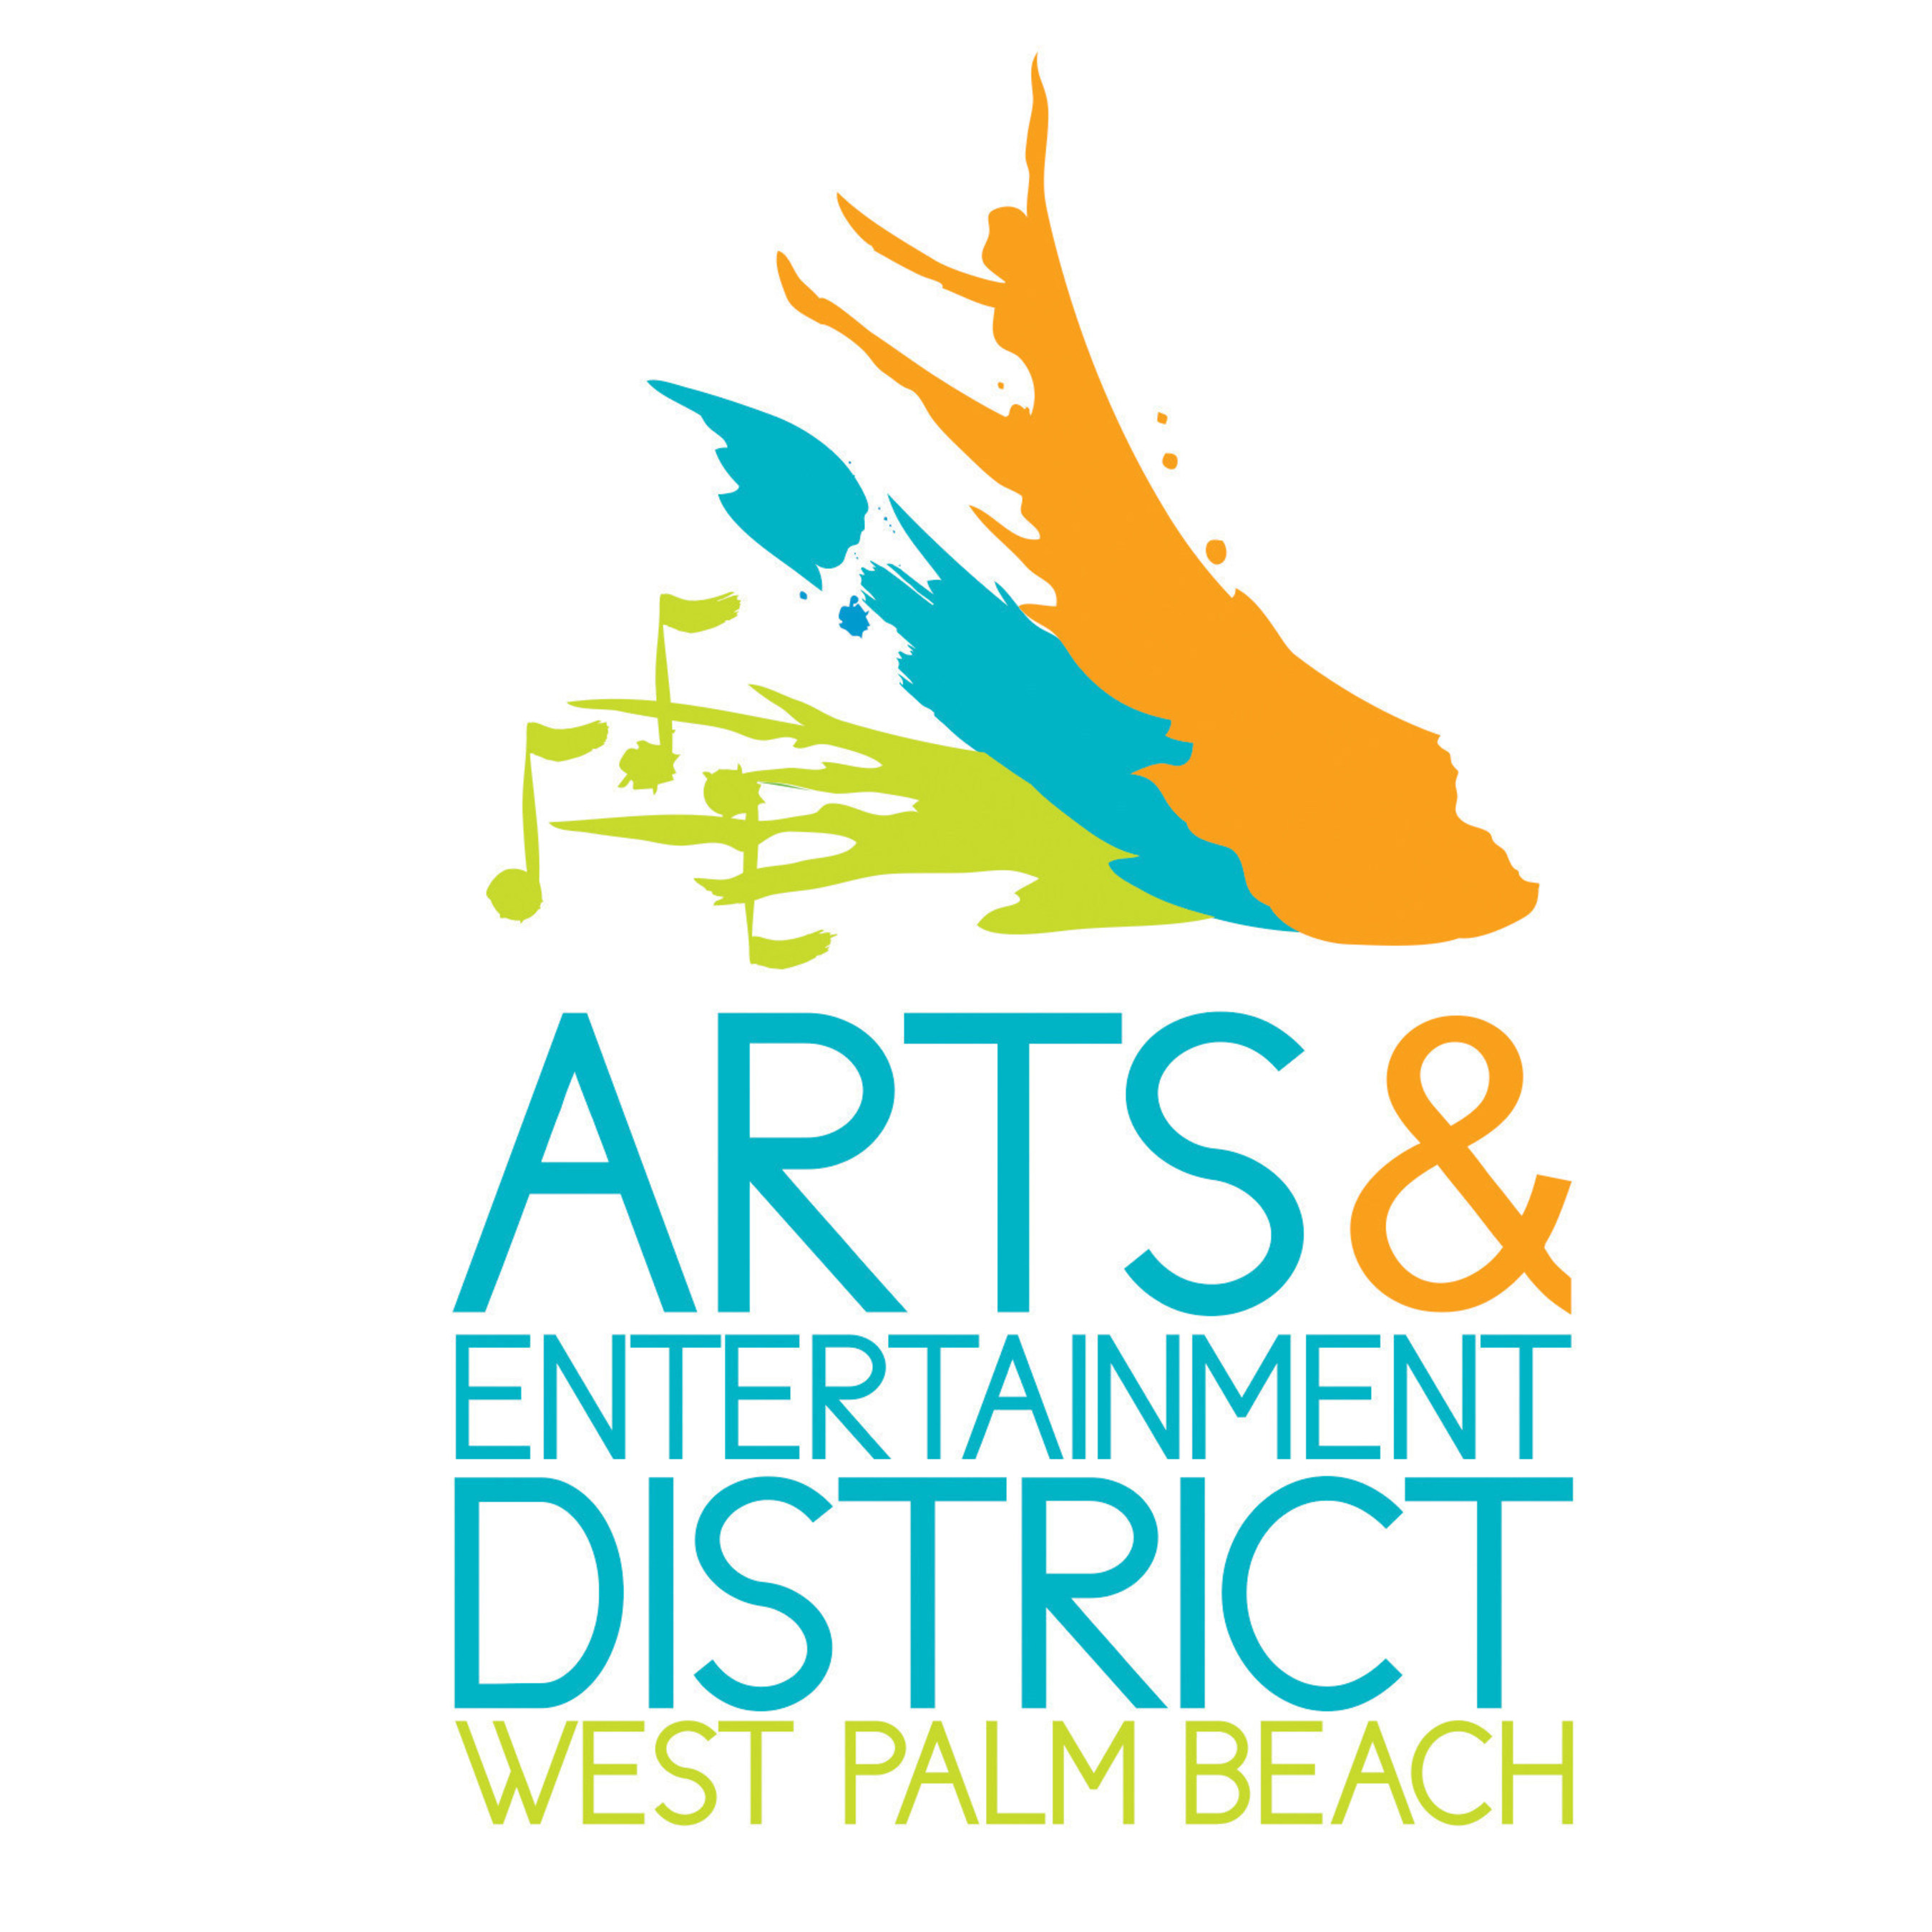 About the West Palm Beach Arts & Entertainment District: The West Palm Beach A&E District is a centralized collection of inspiring arts and entertainment venues; art and history museums; galleries; libraries; performing arts companies; and art education institutions. Situated in the heart of South Florida's most progressive city, the District includes more than 20 distinct and distinguished cultural destinations that form a defining industry cluster. The A&E District enhances the appeal of...